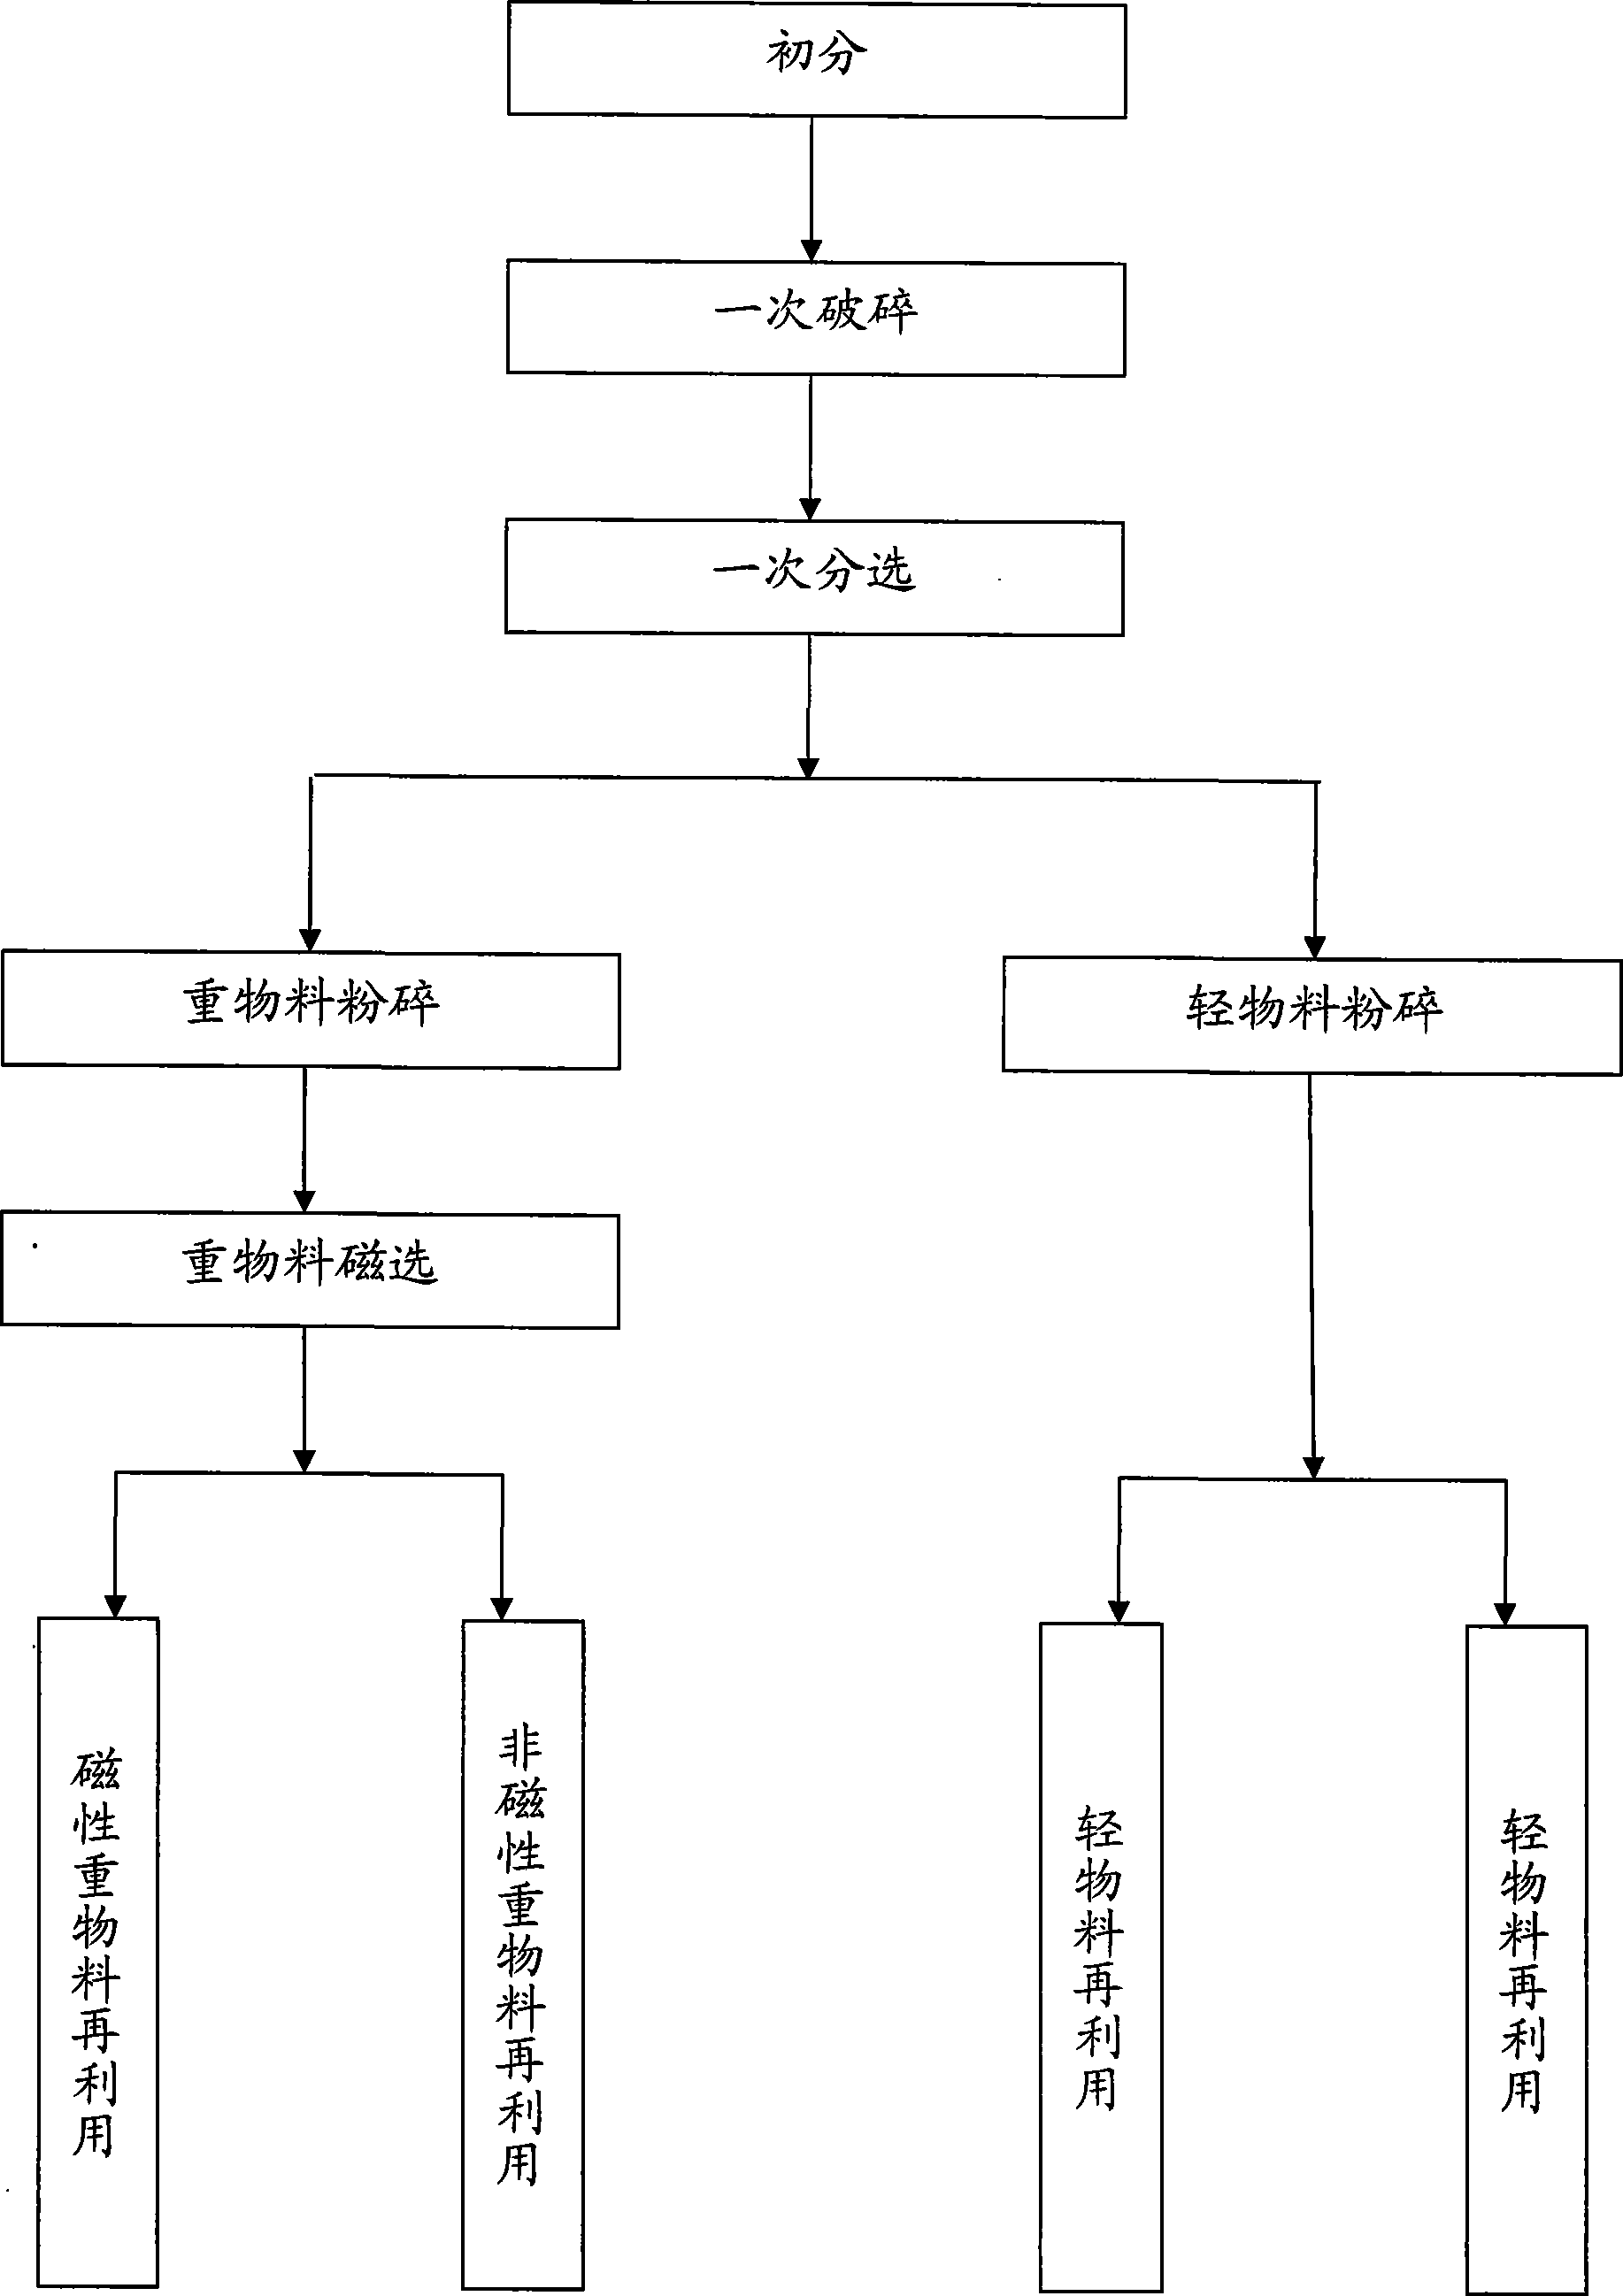 Specification process method for urban pollutant